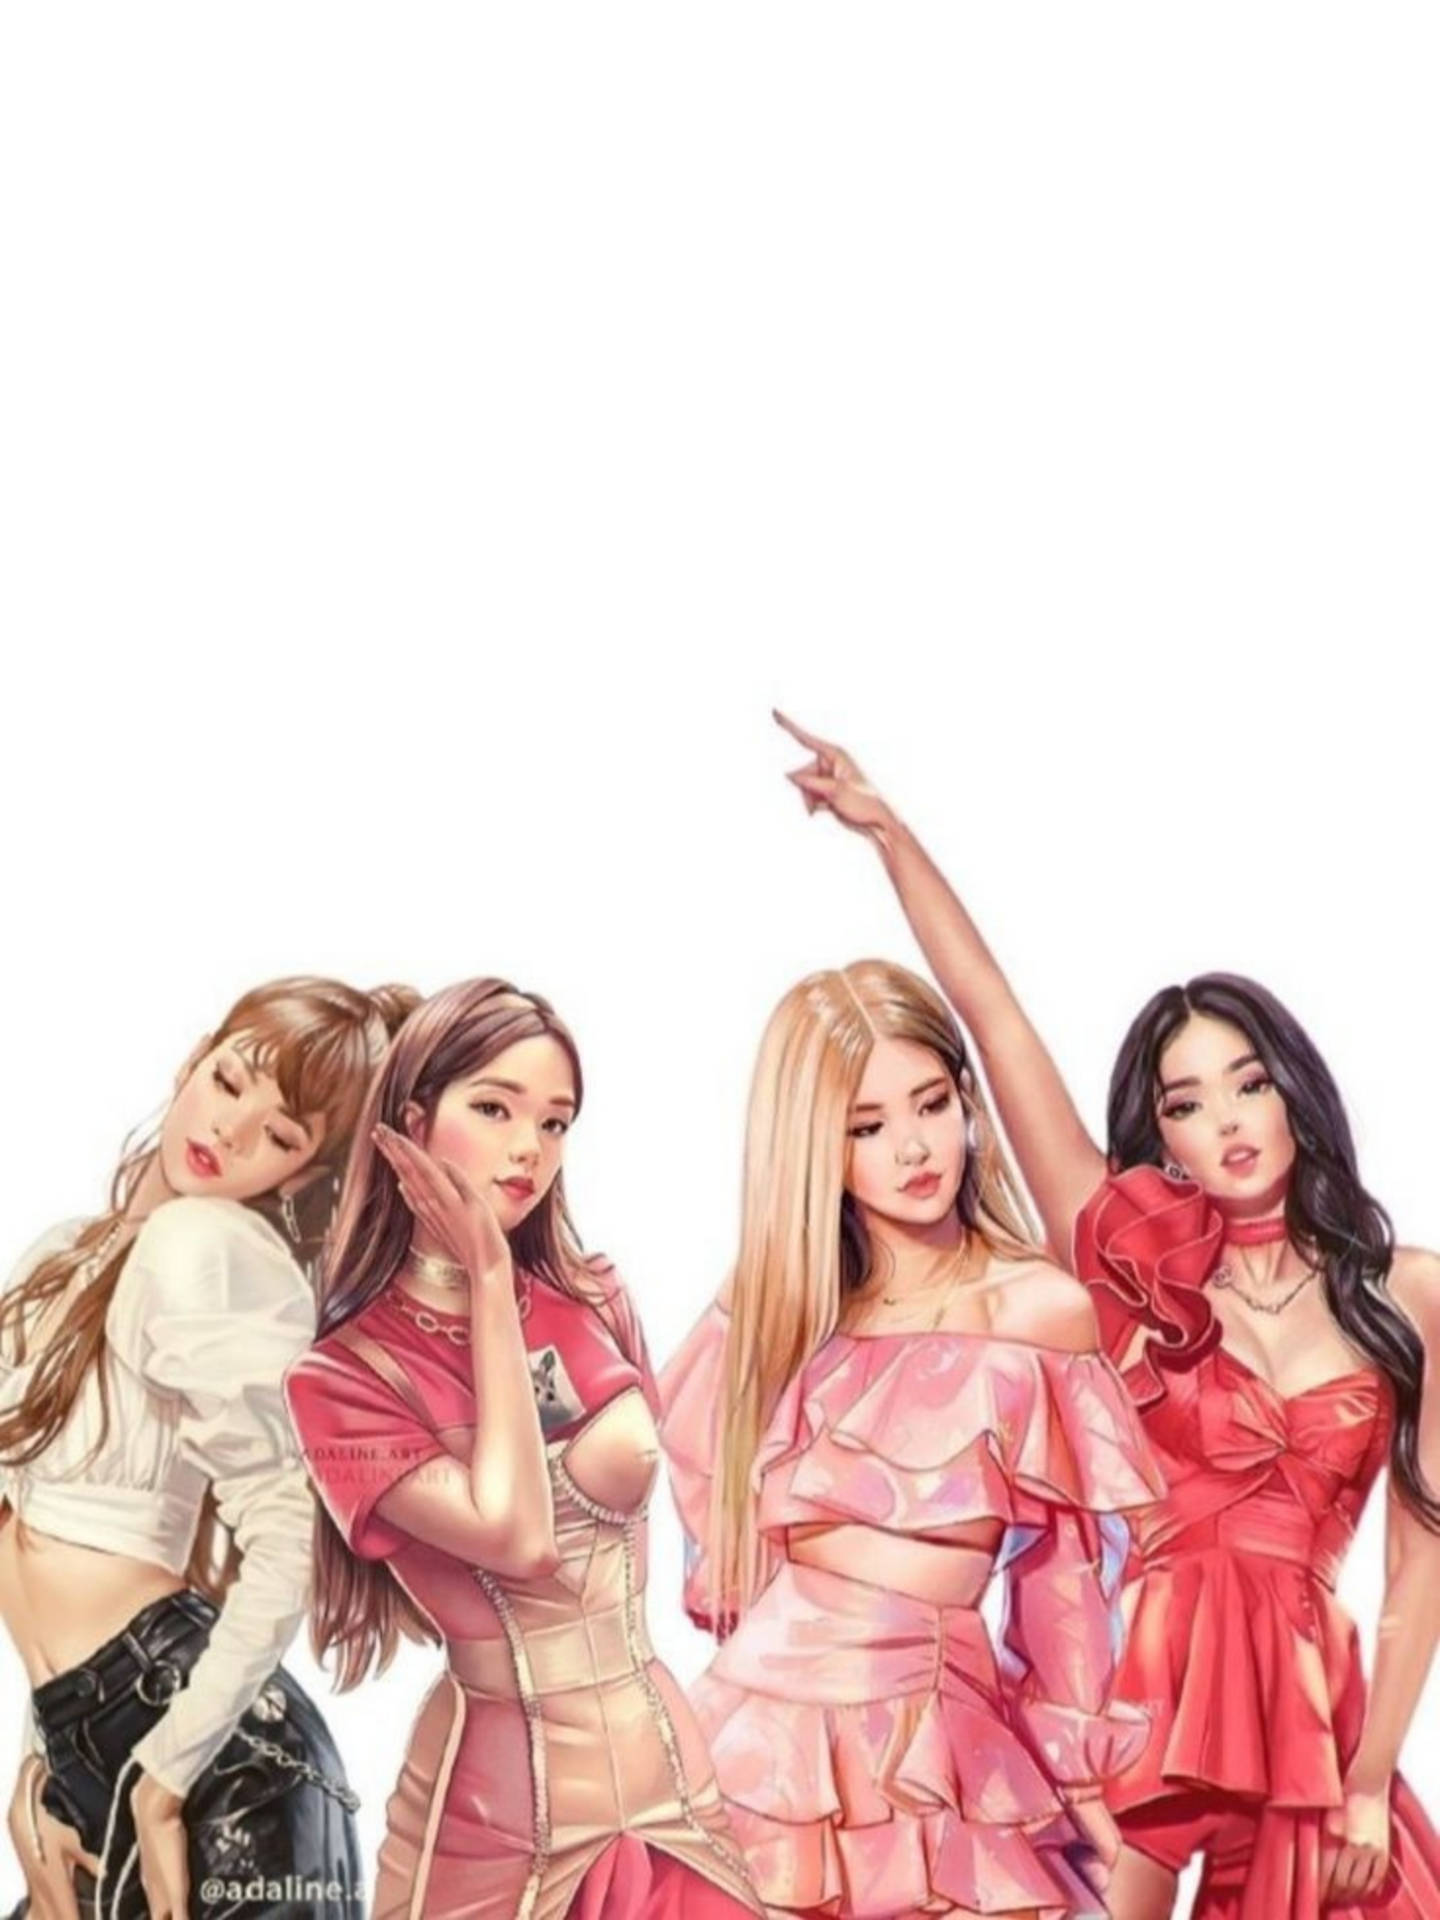 Blackpink Cartoon In Sexy Outfits Wallpaper